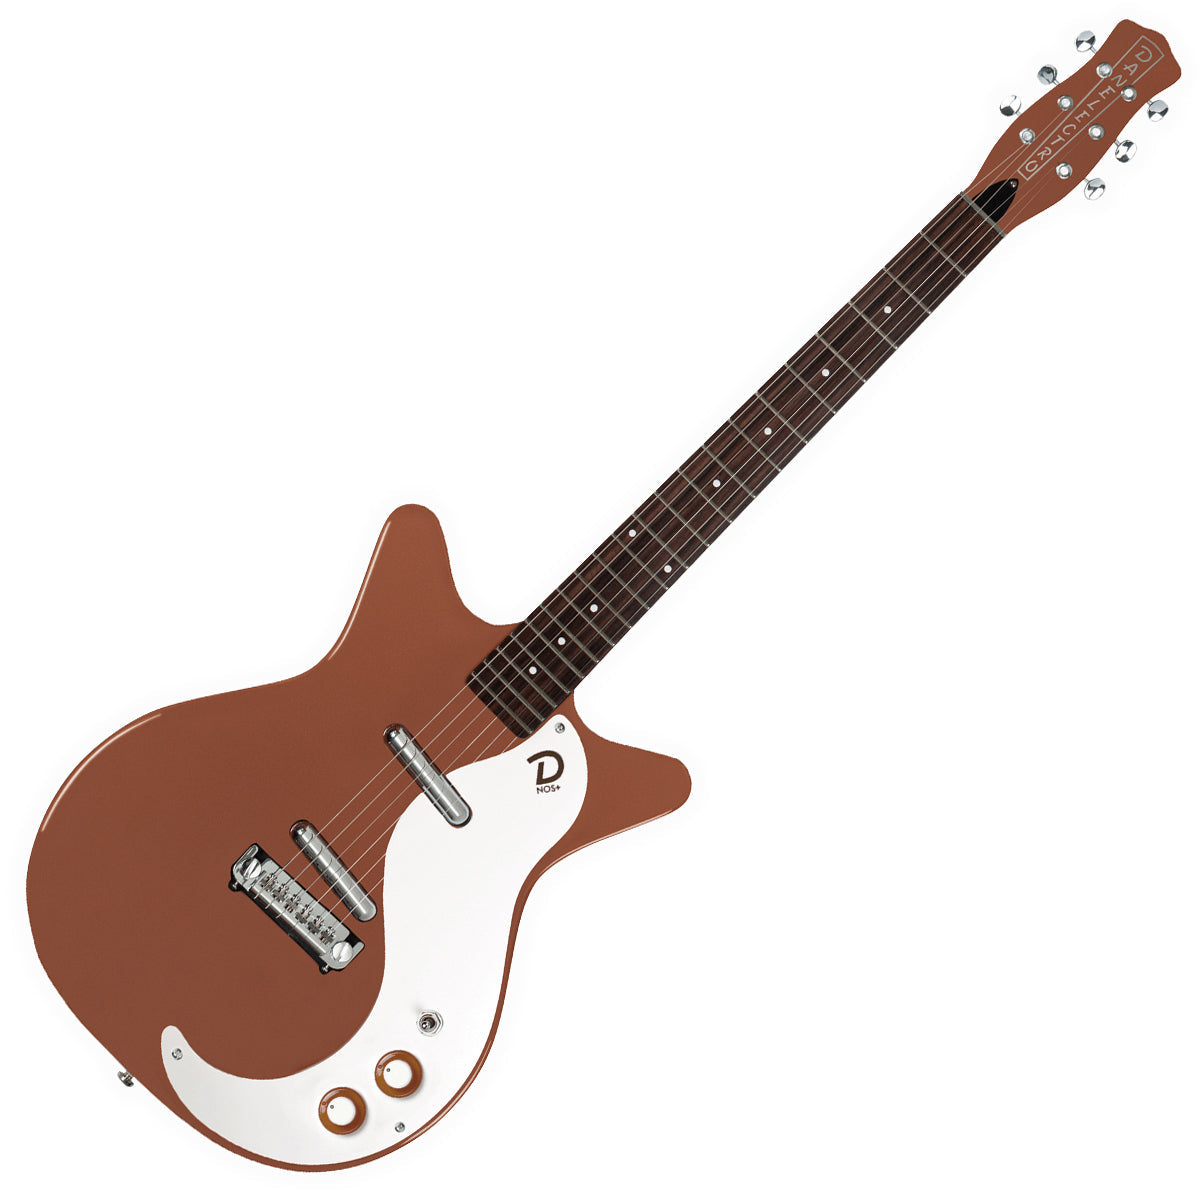 Danelectro '59M NOS+ Electric Guitar ~ Copper, Electric Guitar for sale at Richards Guitars.